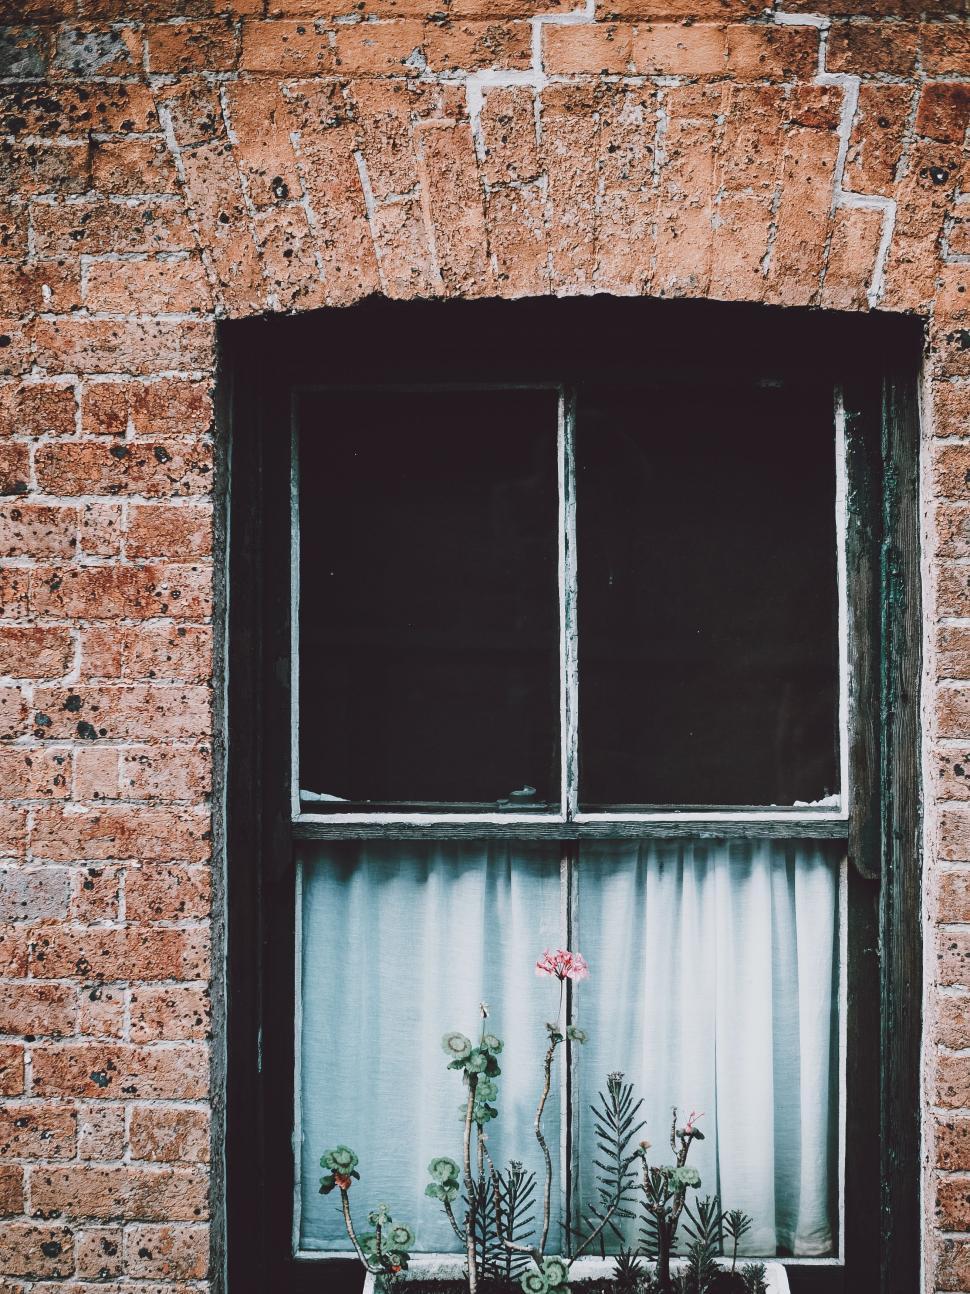 Free Image of A Brick Building With Window and Curtain 